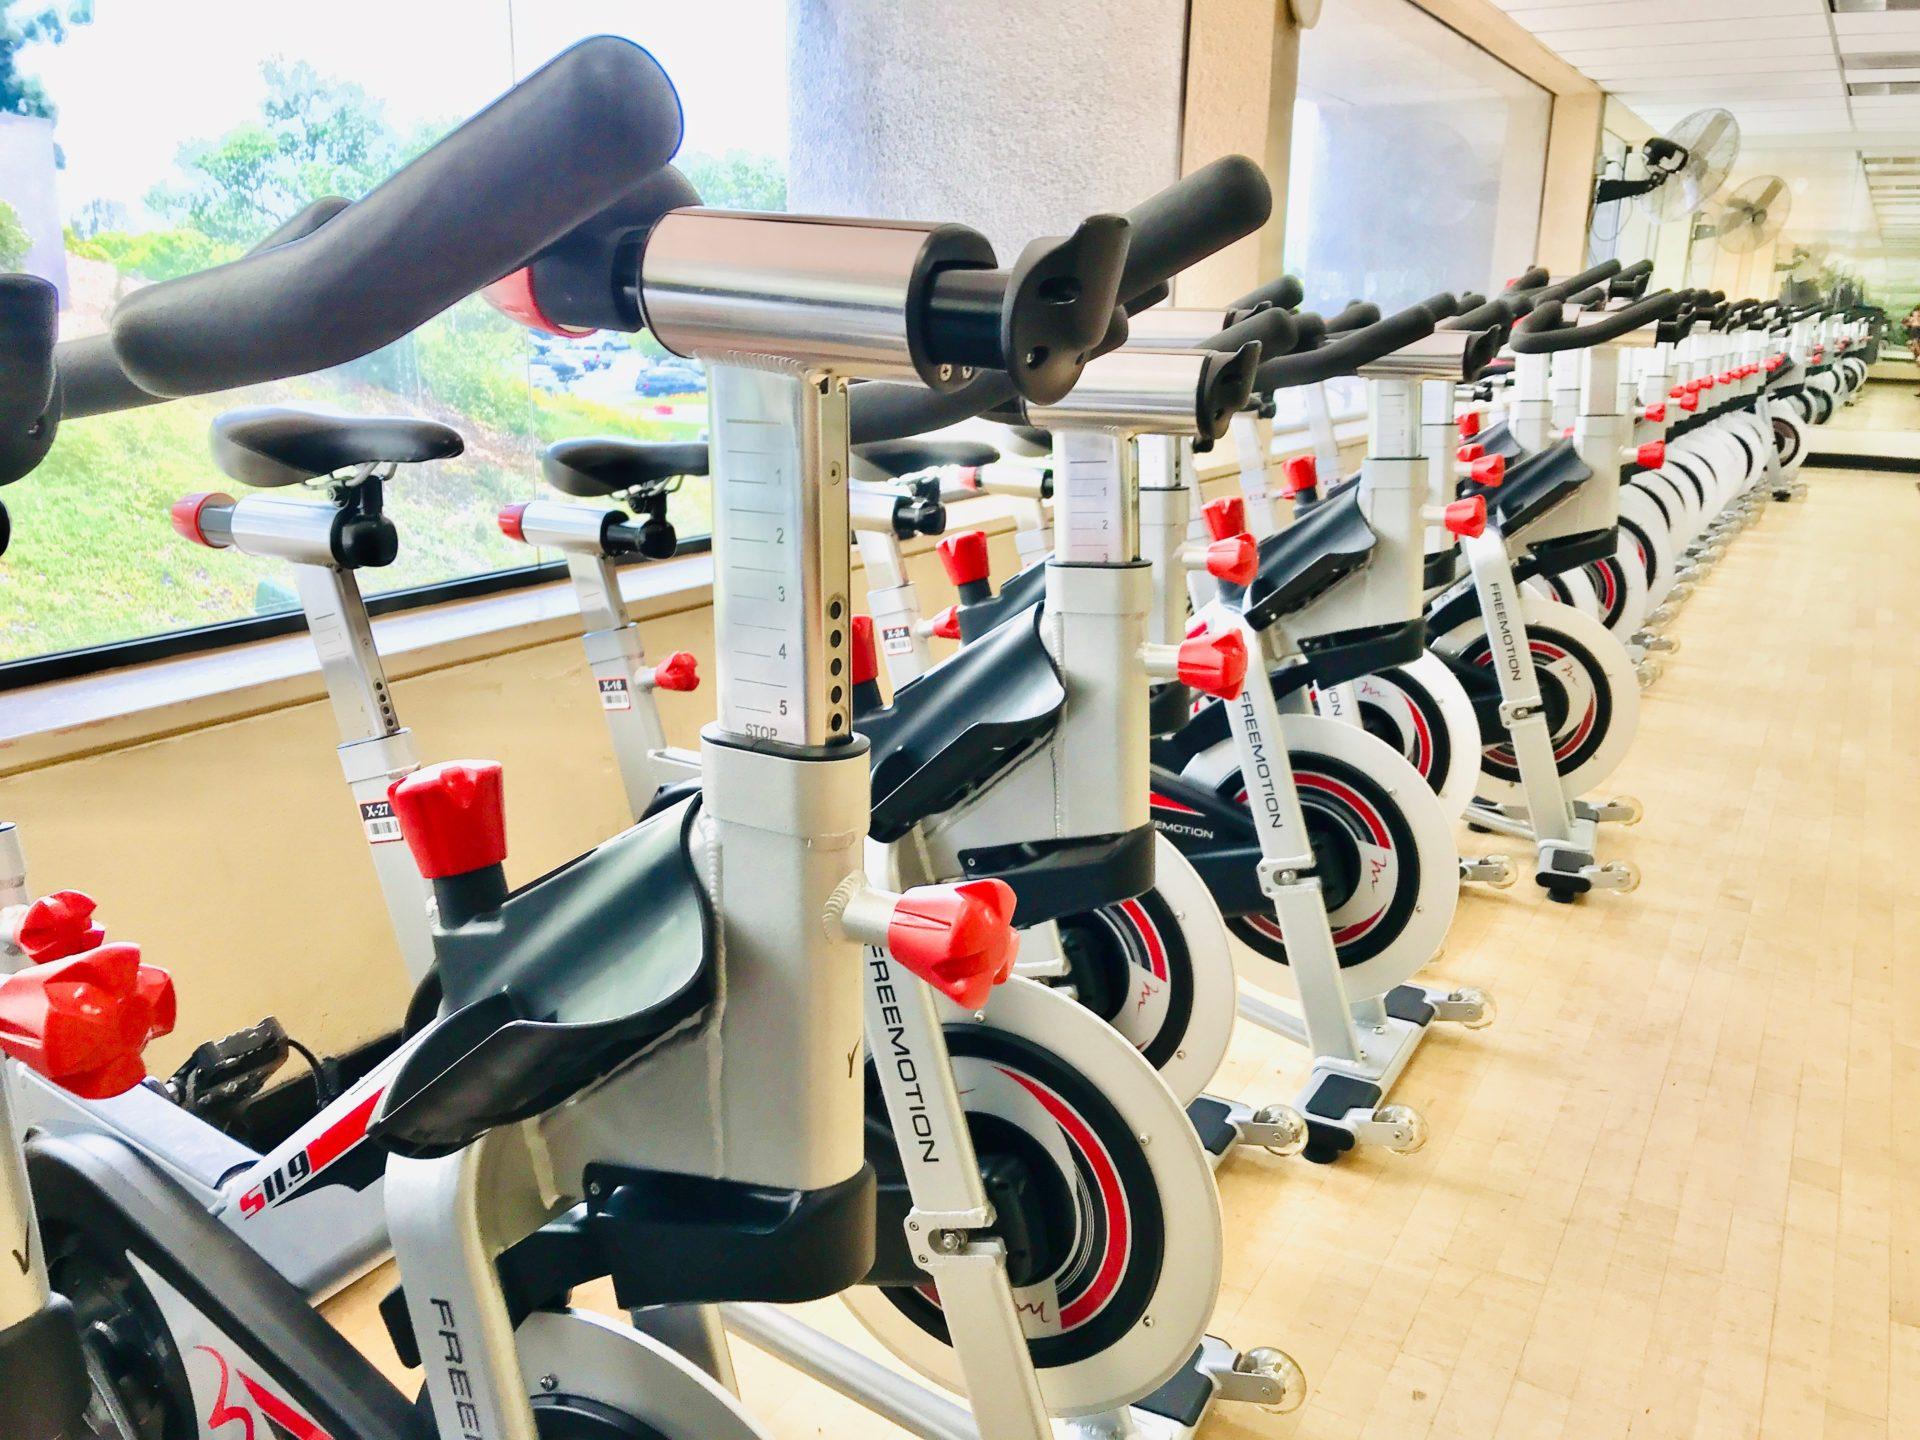 https://www.glofox.com/wp-content/uploads/2021/11/stationary-bikes-at-an-empty-gym-tonythetigersson-tony-andrews-photography-healthcare_t20_zWB9wP.jpg